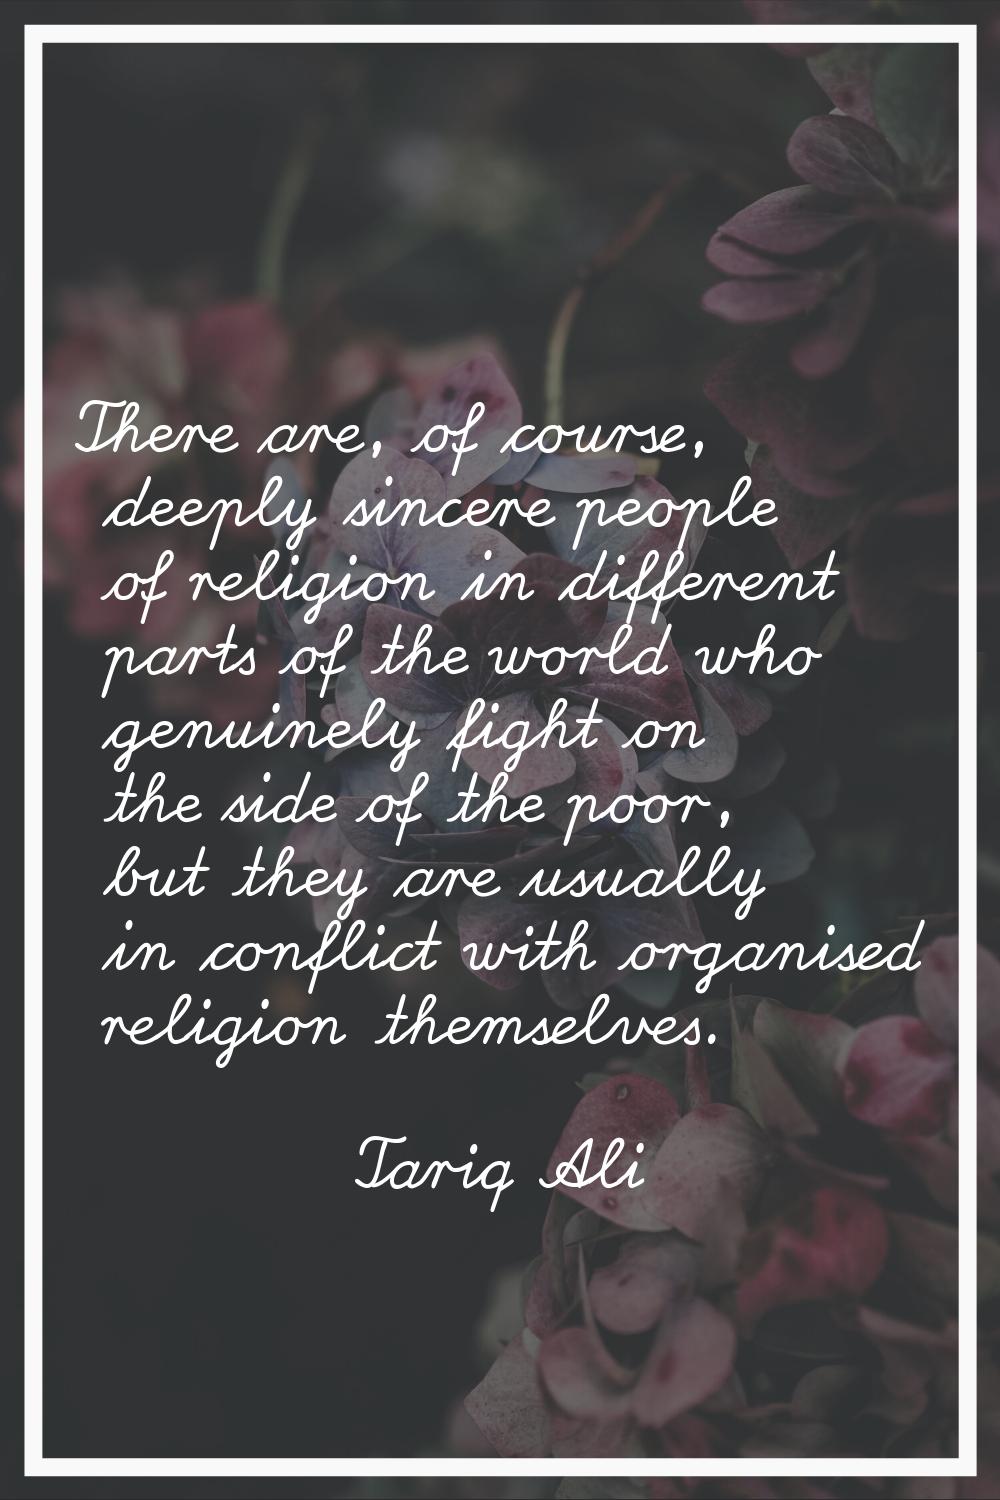 There are, of course, deeply sincere people of religion in different parts of the world who genuine